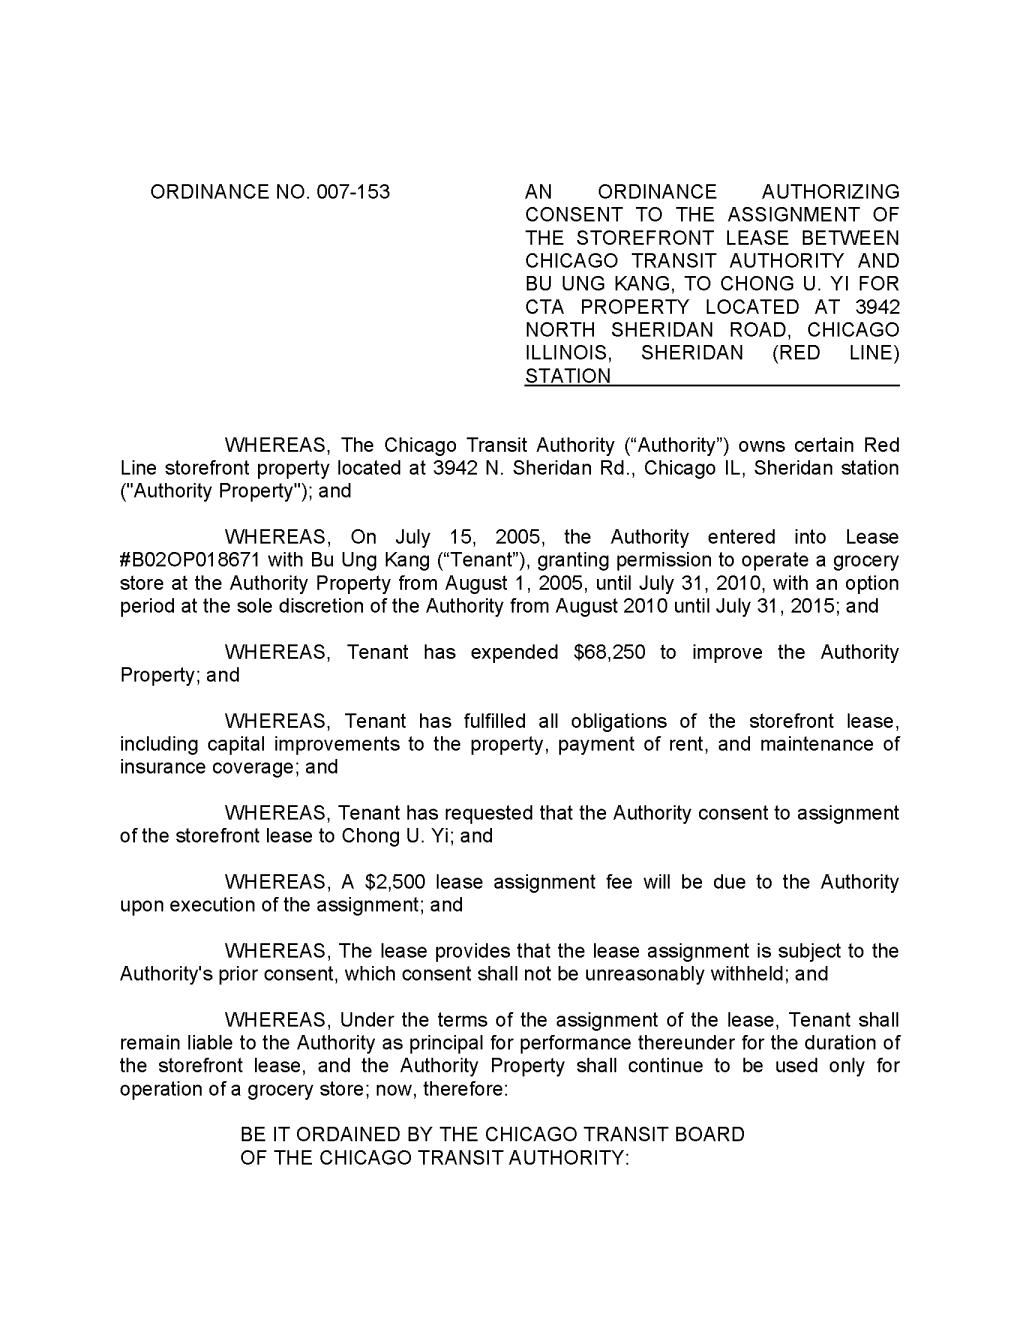 Ordinance No. 007-153 an Ordinance Authorizing Consent to the Assignment of the Storefront Lease Between Chicago Transit Authority and Bu Ung Kang, to Chong U